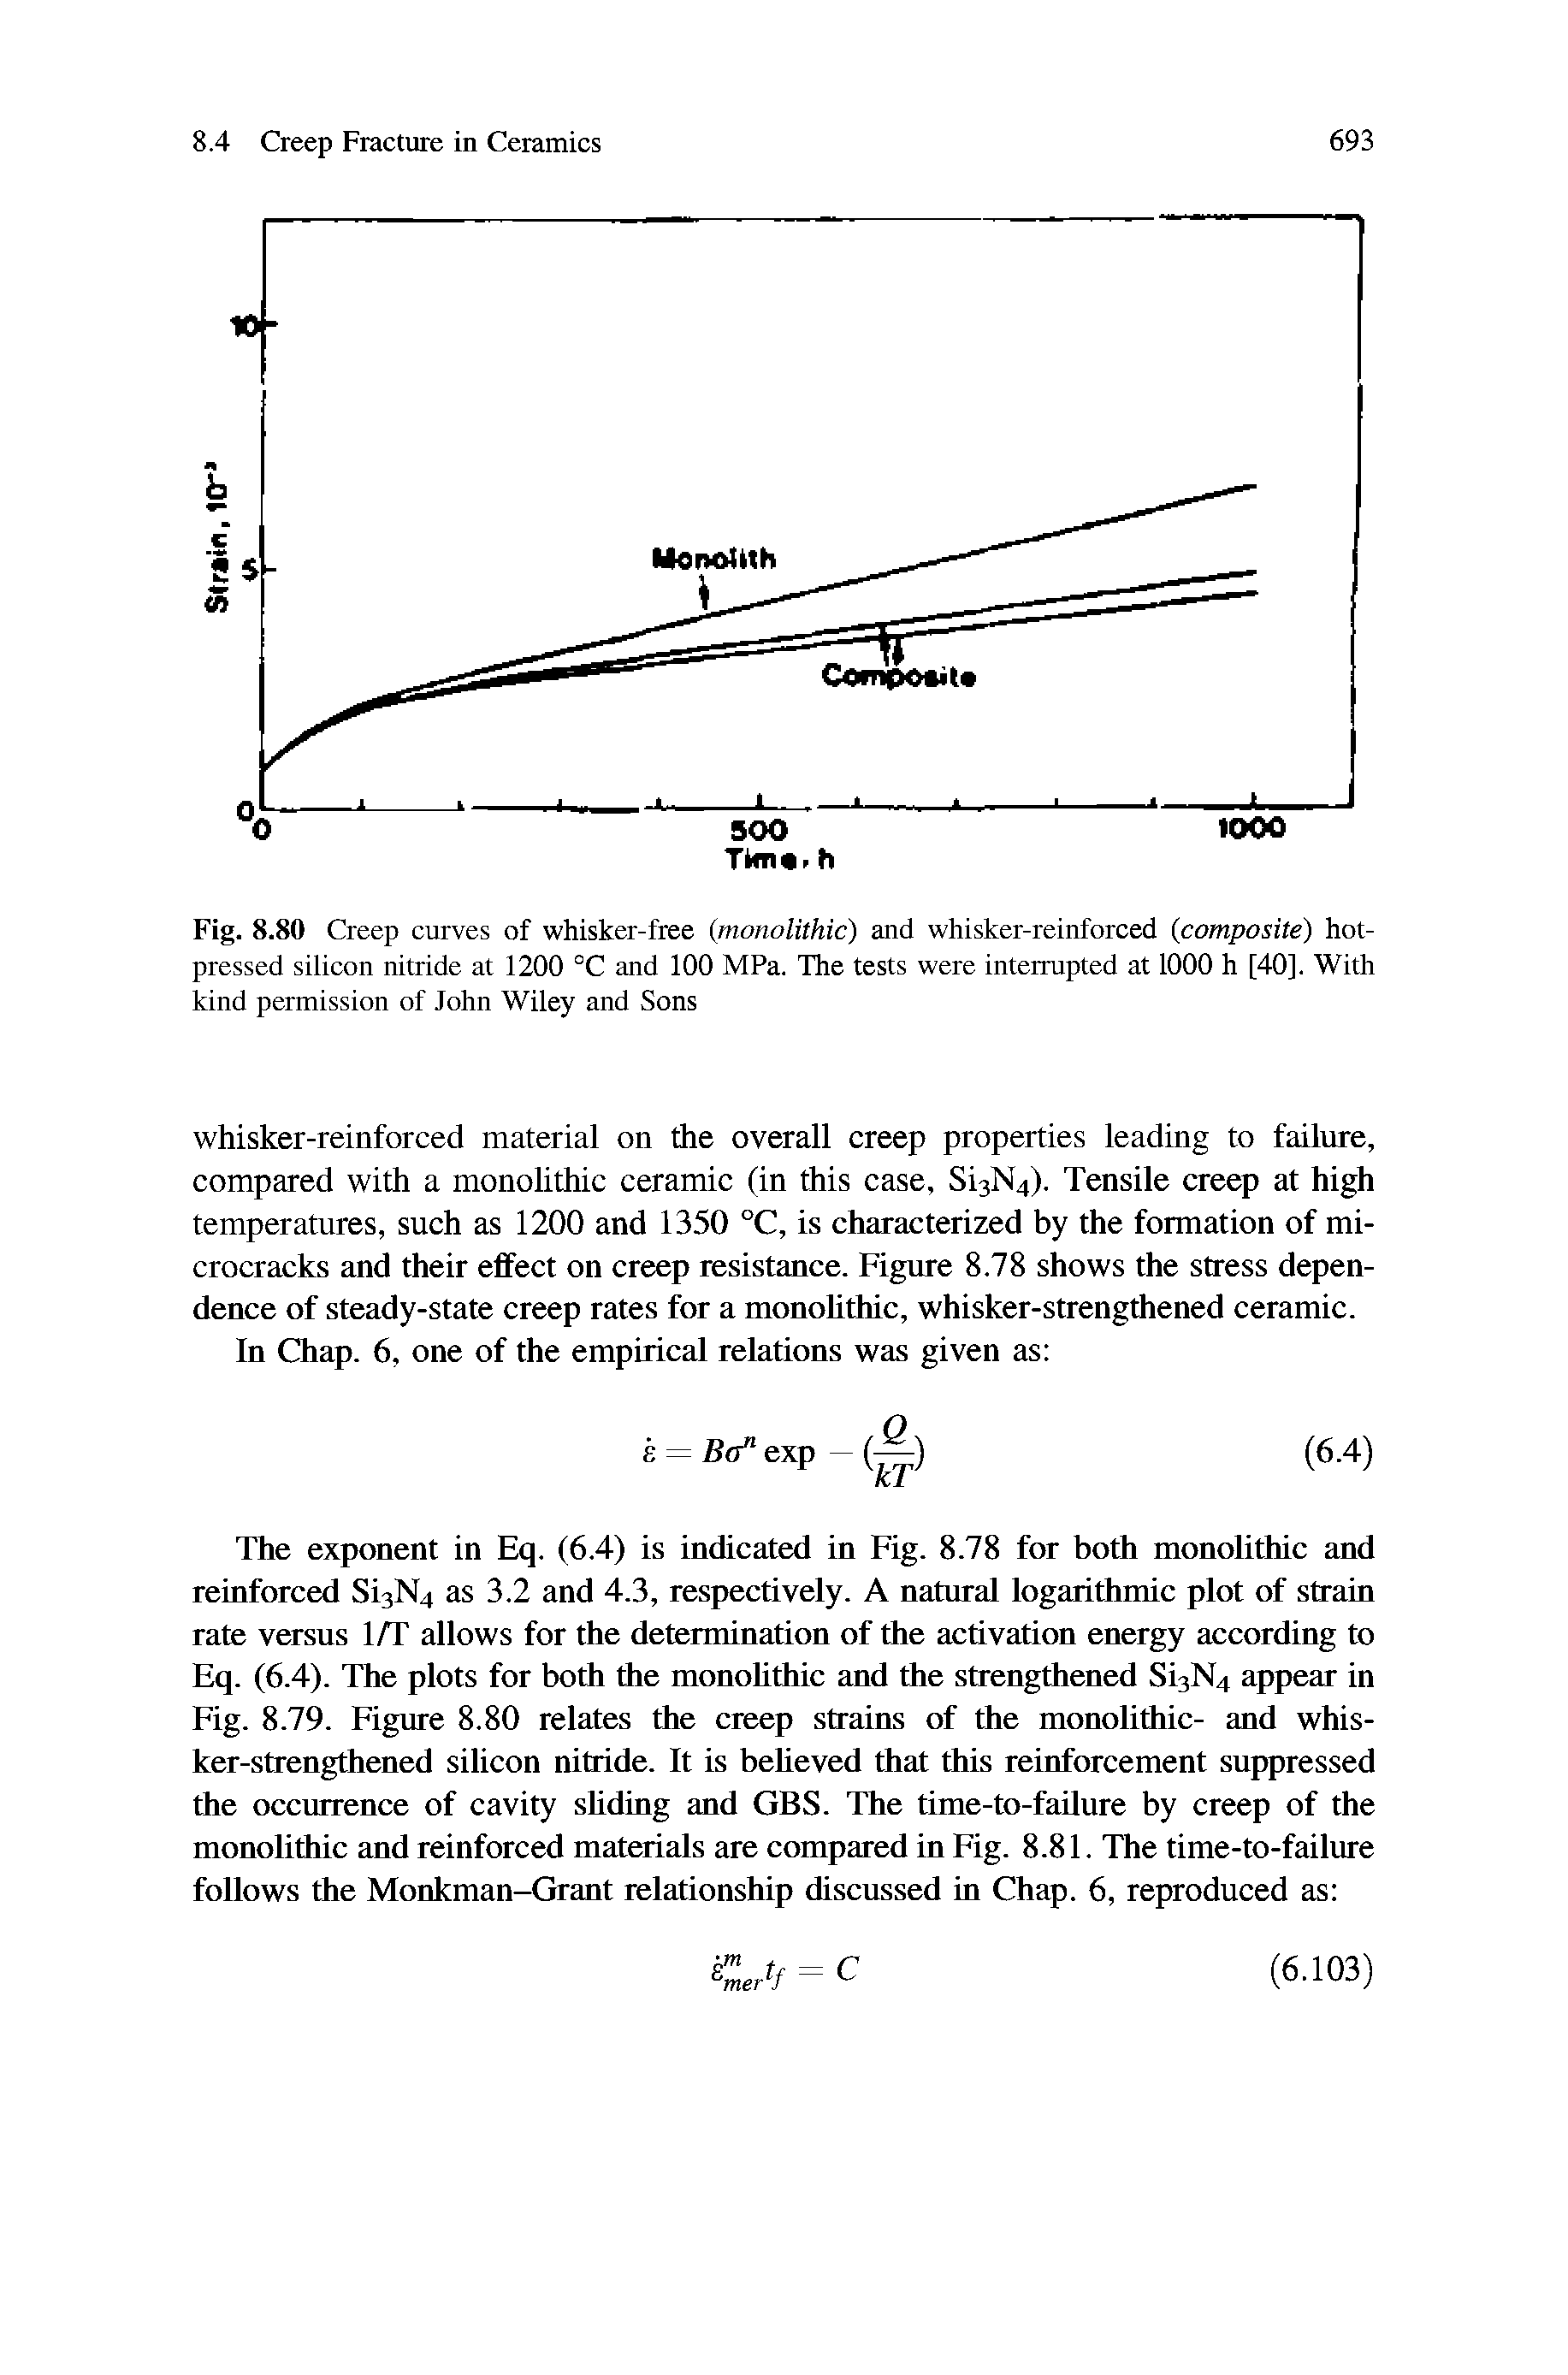 Fig. 8.80 Creep curves of whisker-free (monolithic) and whisker-reinforced (composite) hot-pressed silicon nitride at 1200 °C and 100 MPa. The tests were interrupted at 1000 h [40]. With kind permission of John Wiley and Sons...